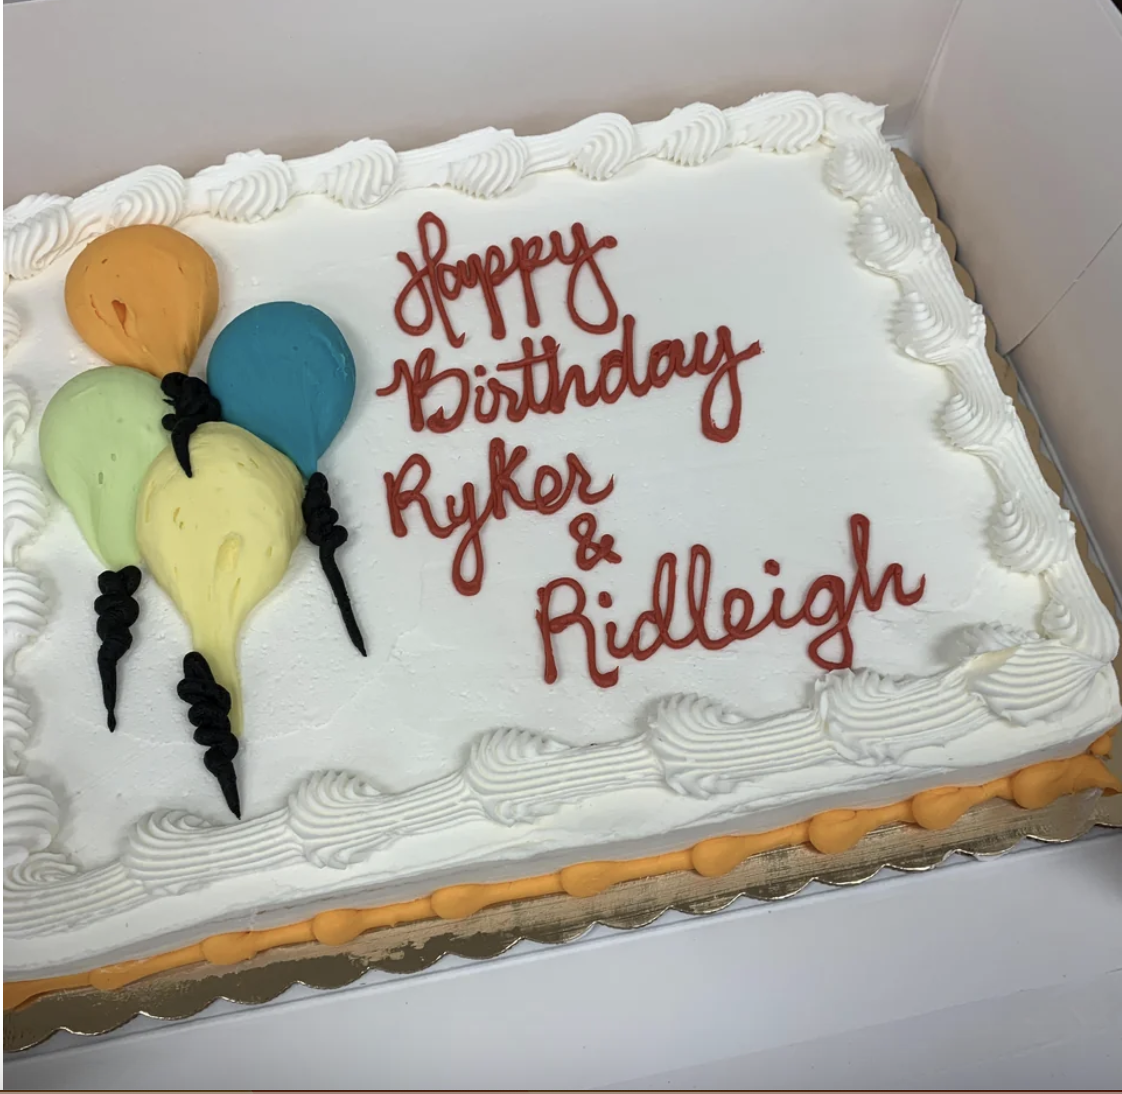 &quot;Happy Birthday Ryker and Riddleigh&quot;